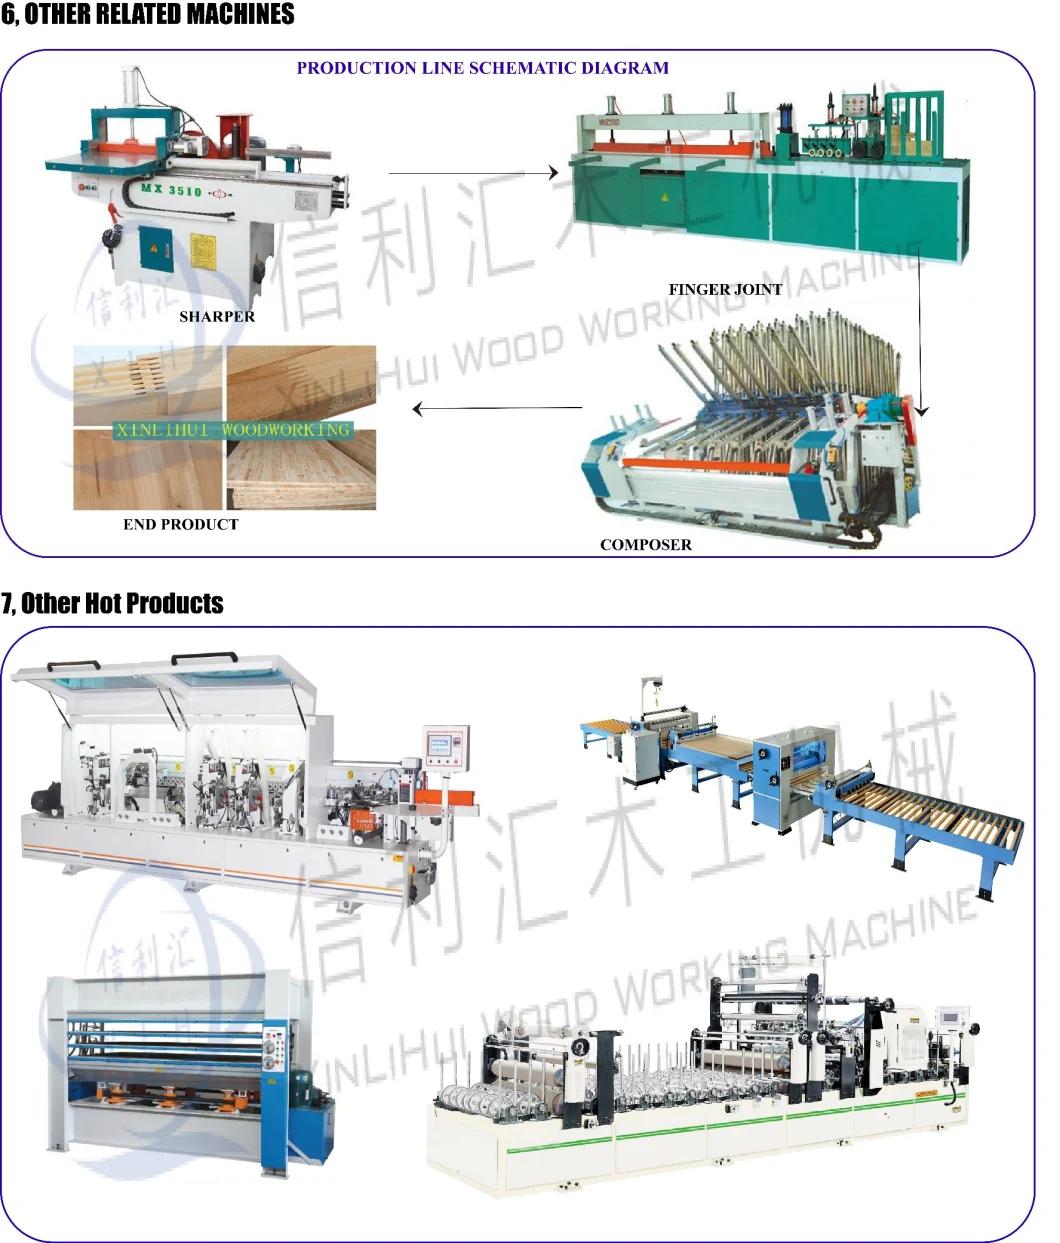 Guangzhou Wood Working Machiny Finger Jointer, Guangzhou Wood Working Finger Joint Machine, Finger Jointer Factory, Automatic Finger Jointing Line